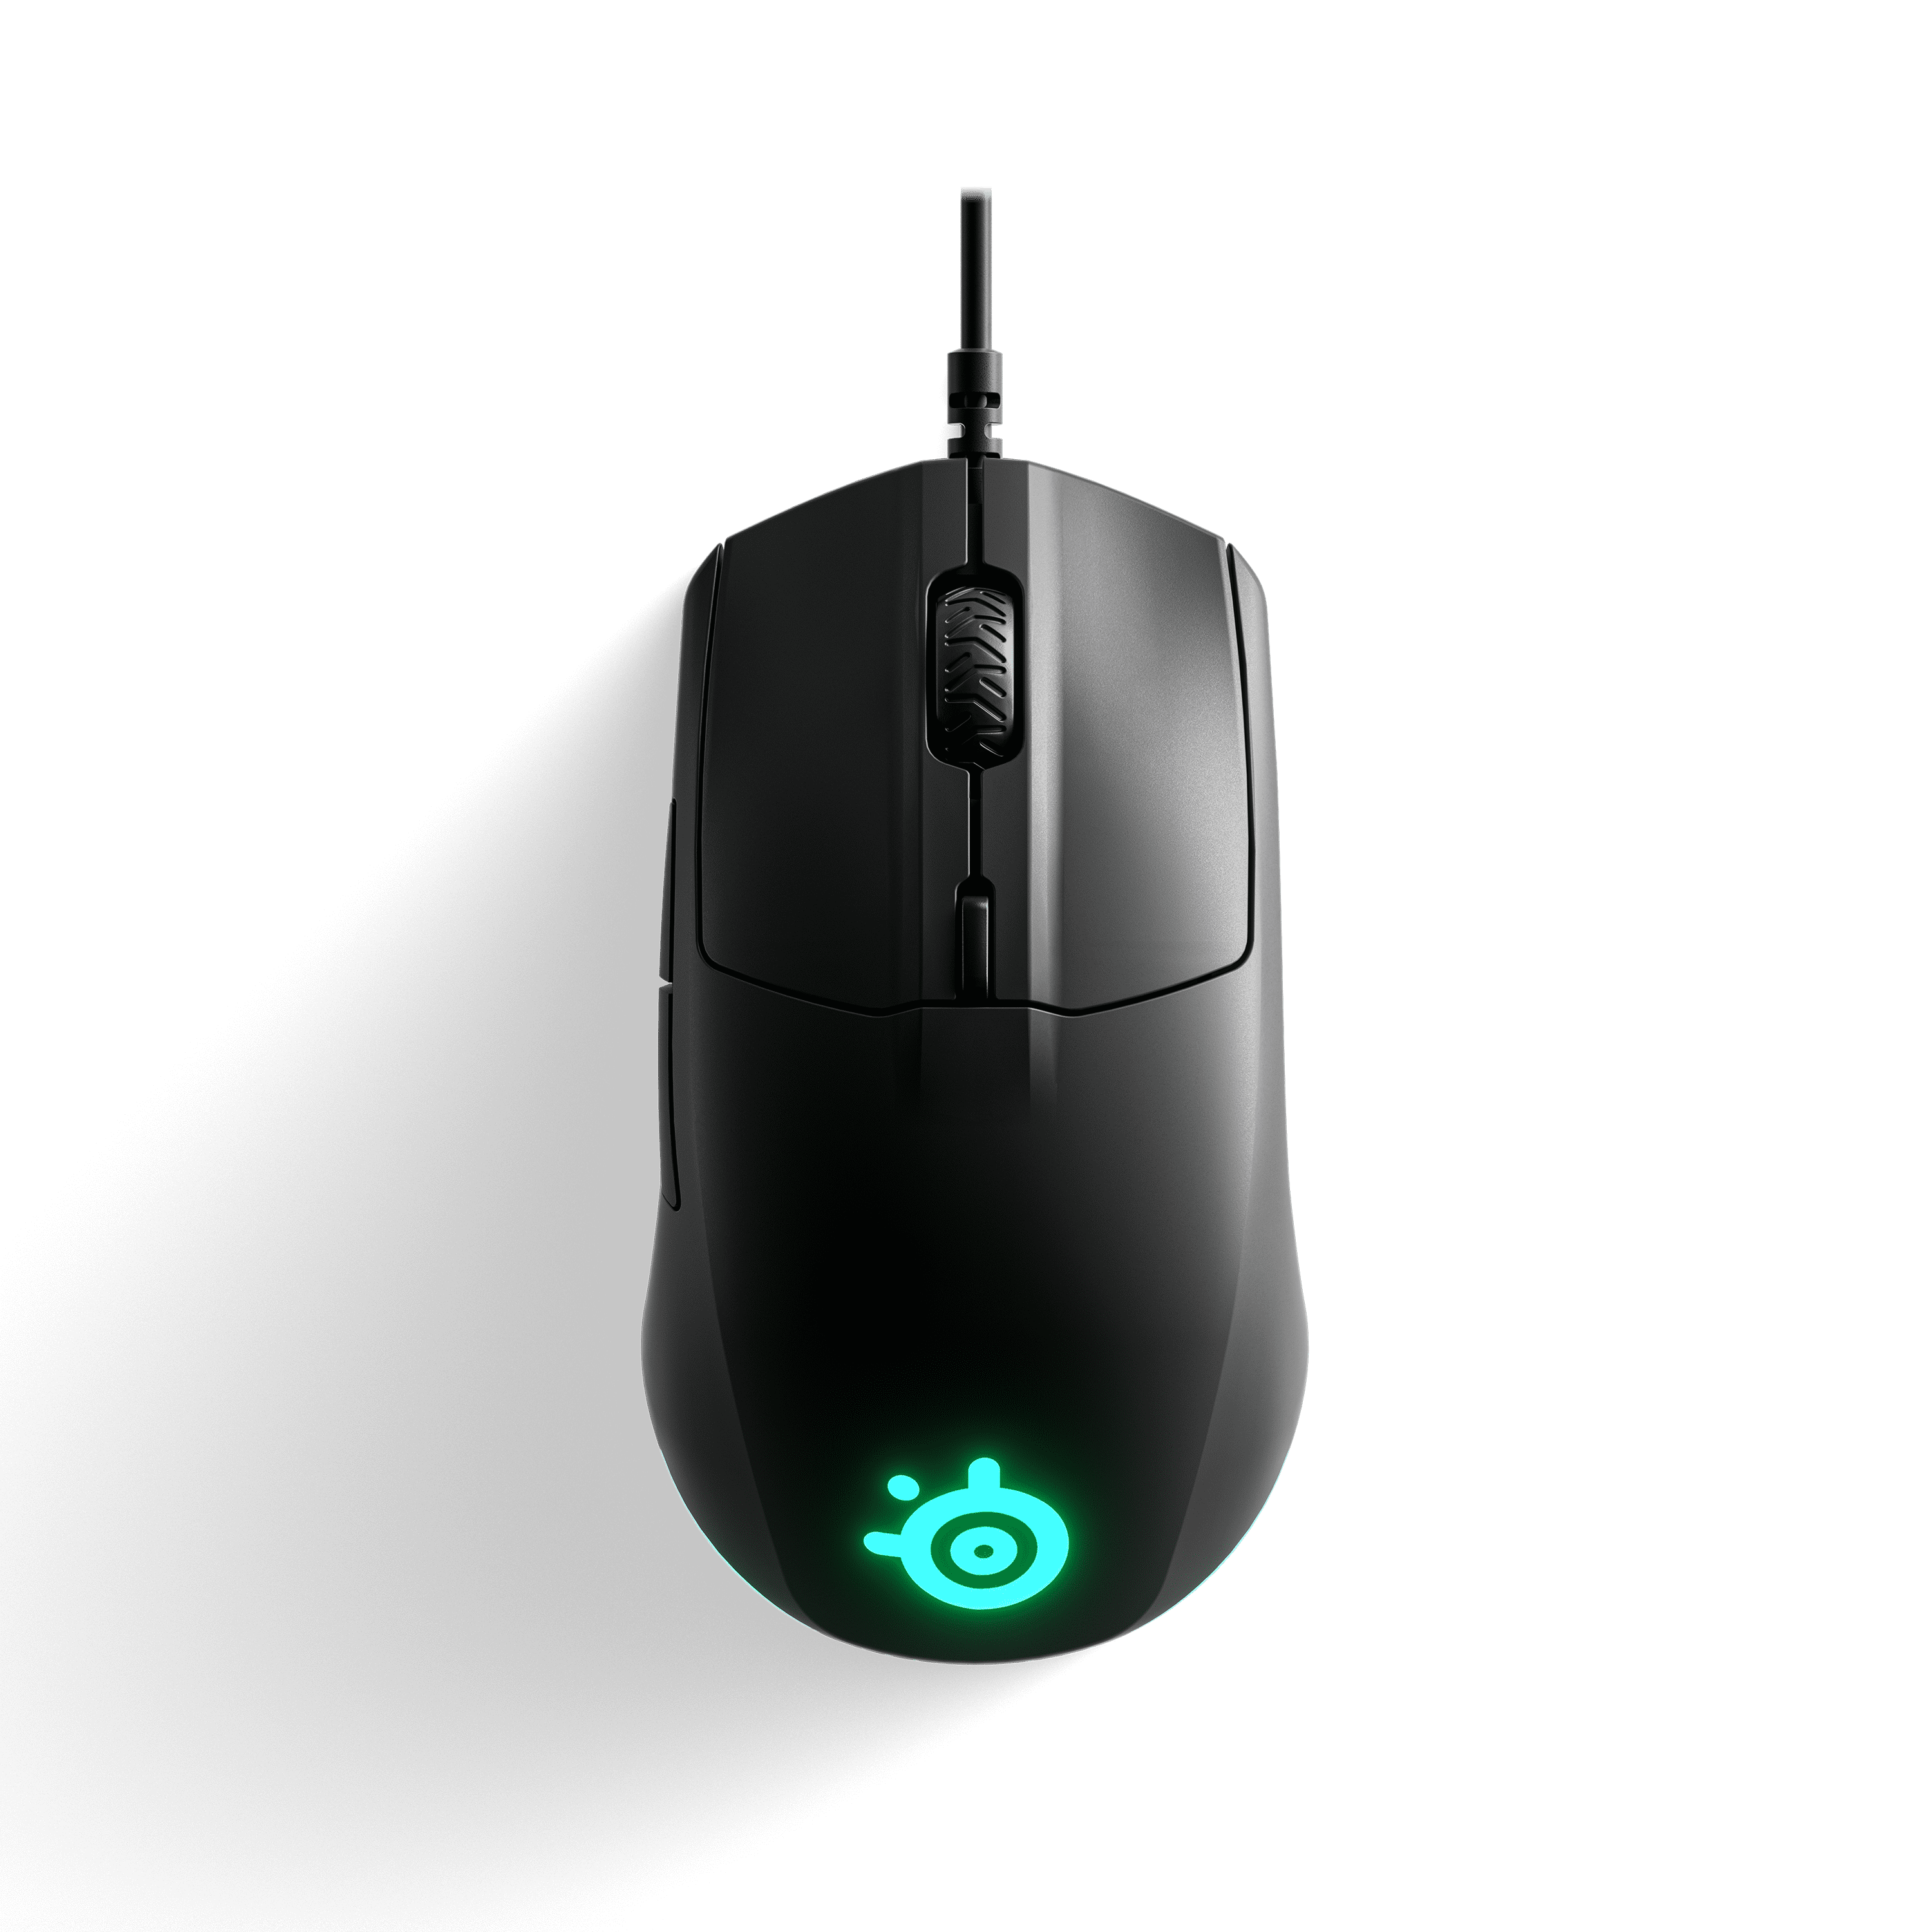 steelseries wow mouse driver